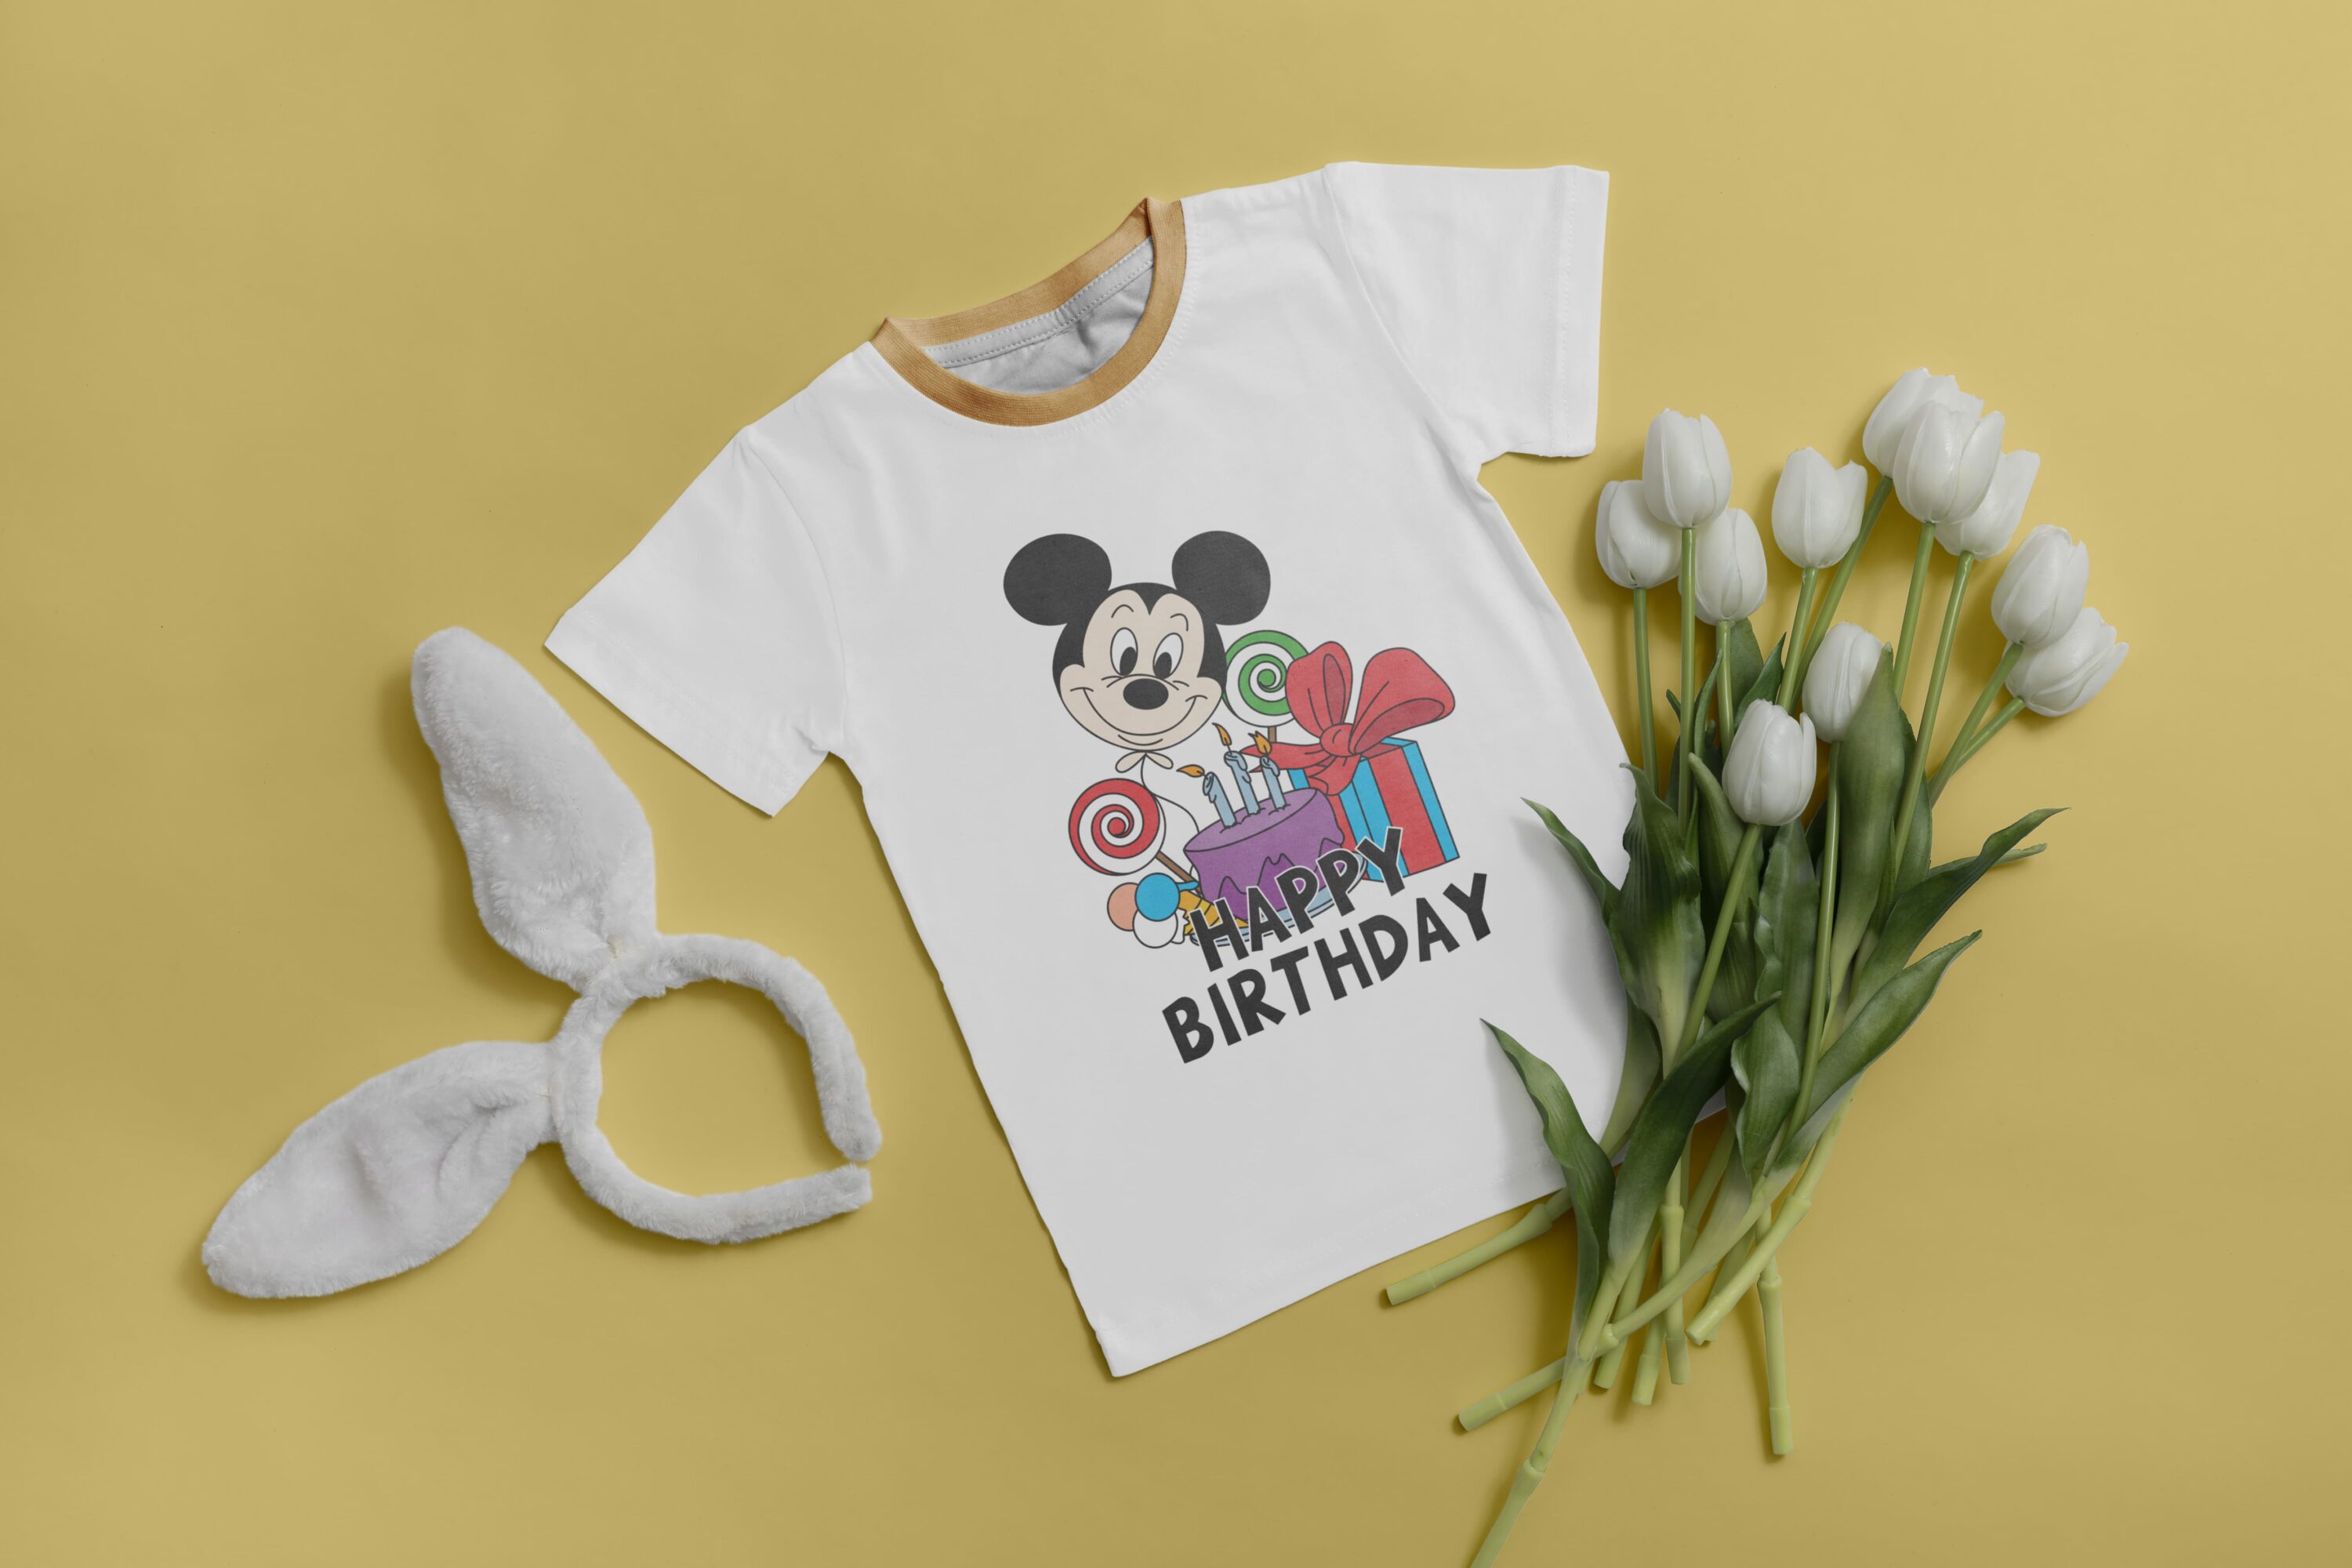 Lots of birthday gifts for Mickey Mouse on the white t-shirt.